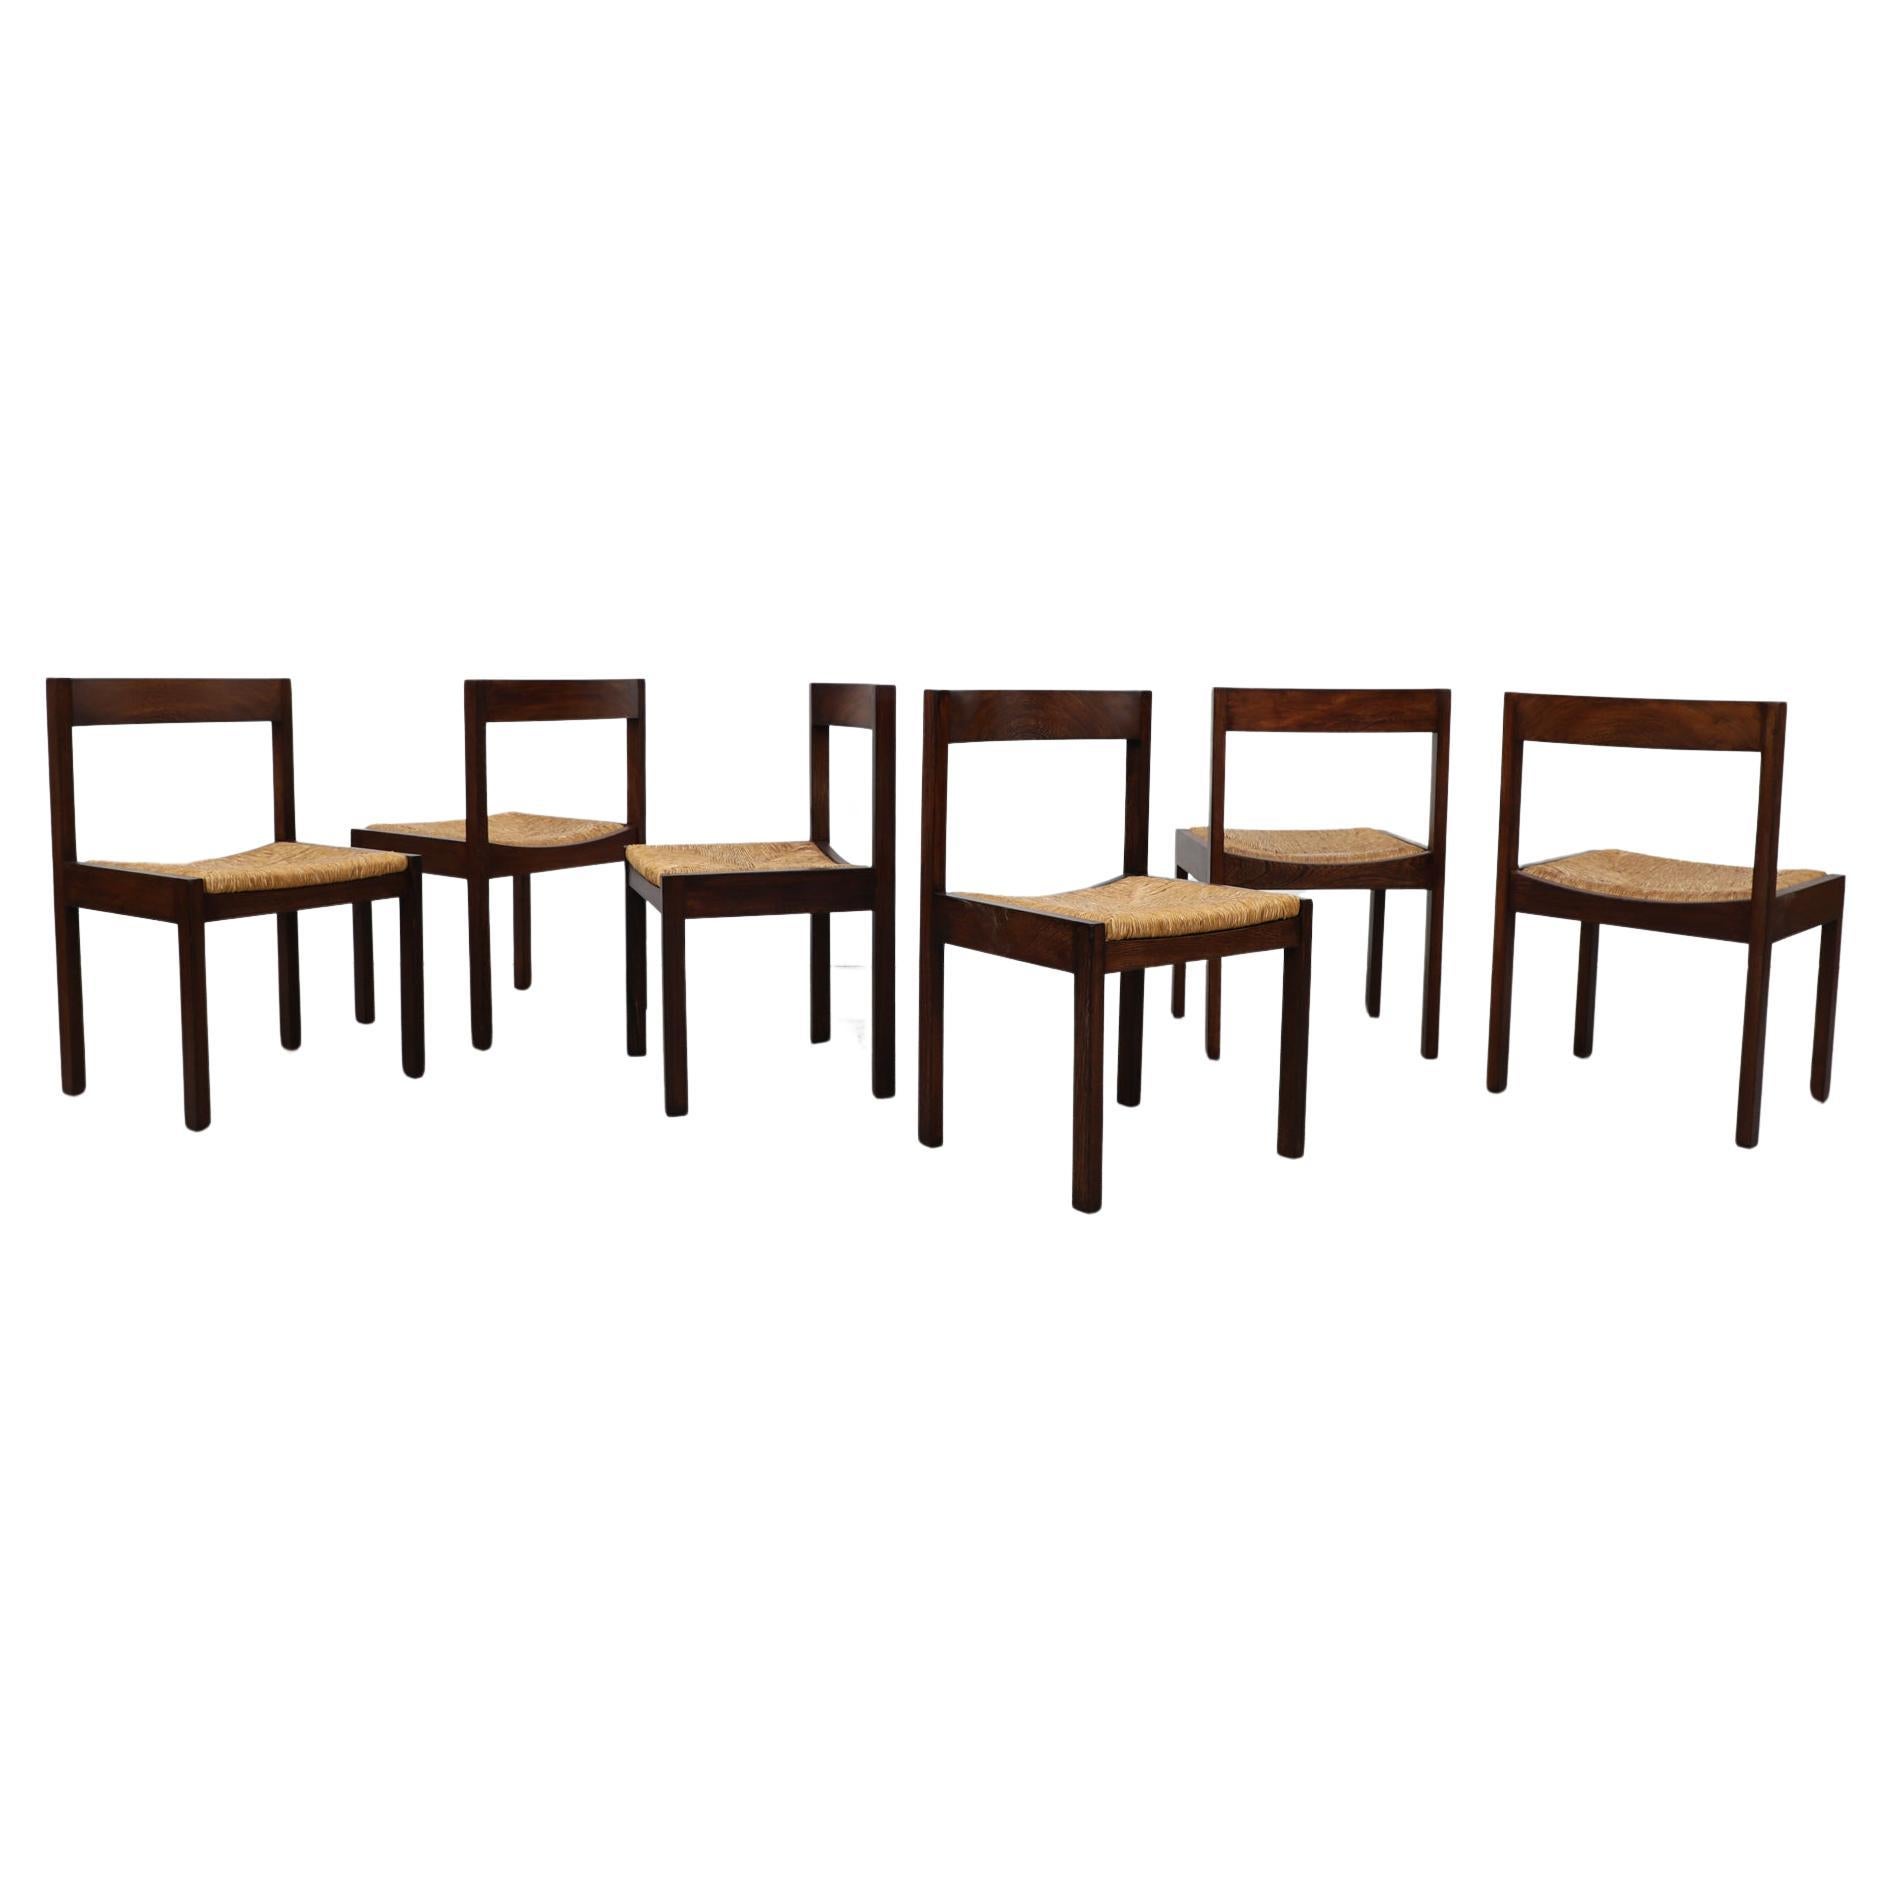 Set of 6 Martin Visser 'SE85' Rush and Wenge Dining Chairs for 't Spectrum